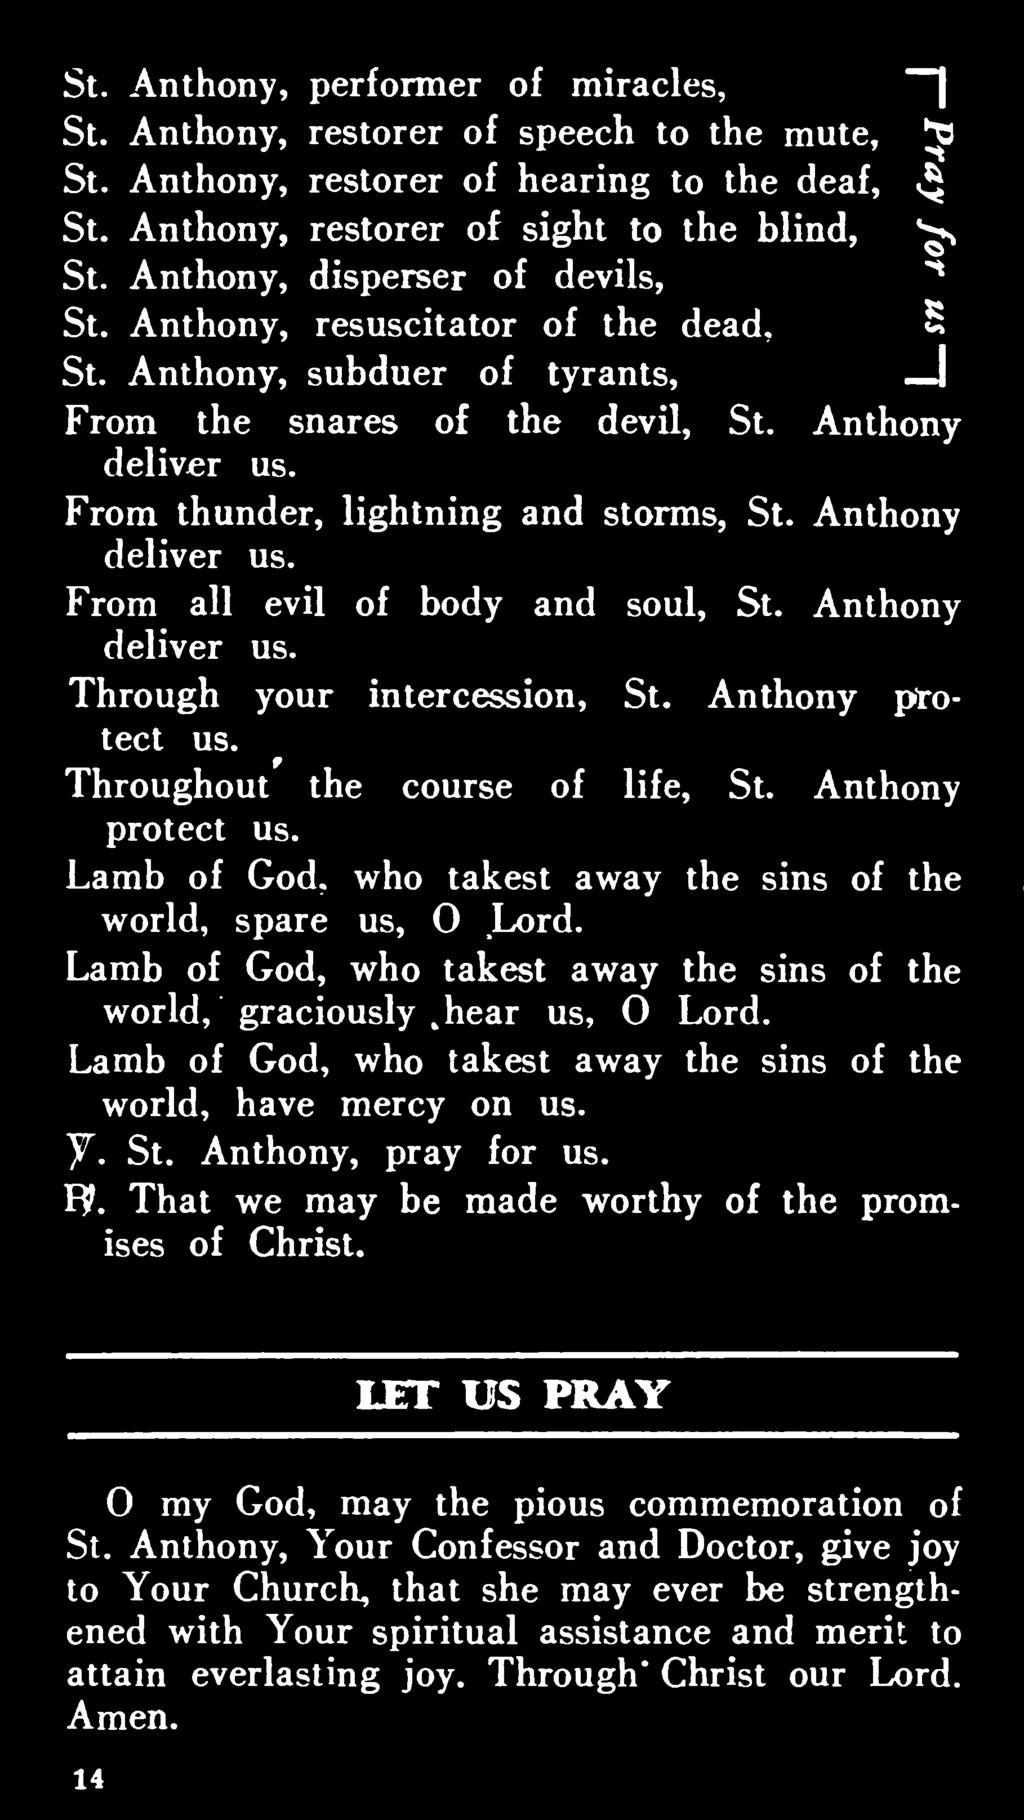 hear us, 0 Lord. Lamb of God, who takest away the sins of the world, have mercy on us. y. St. Anthony, pray for us. F?. That we may be made worthy of the promises of Christ.